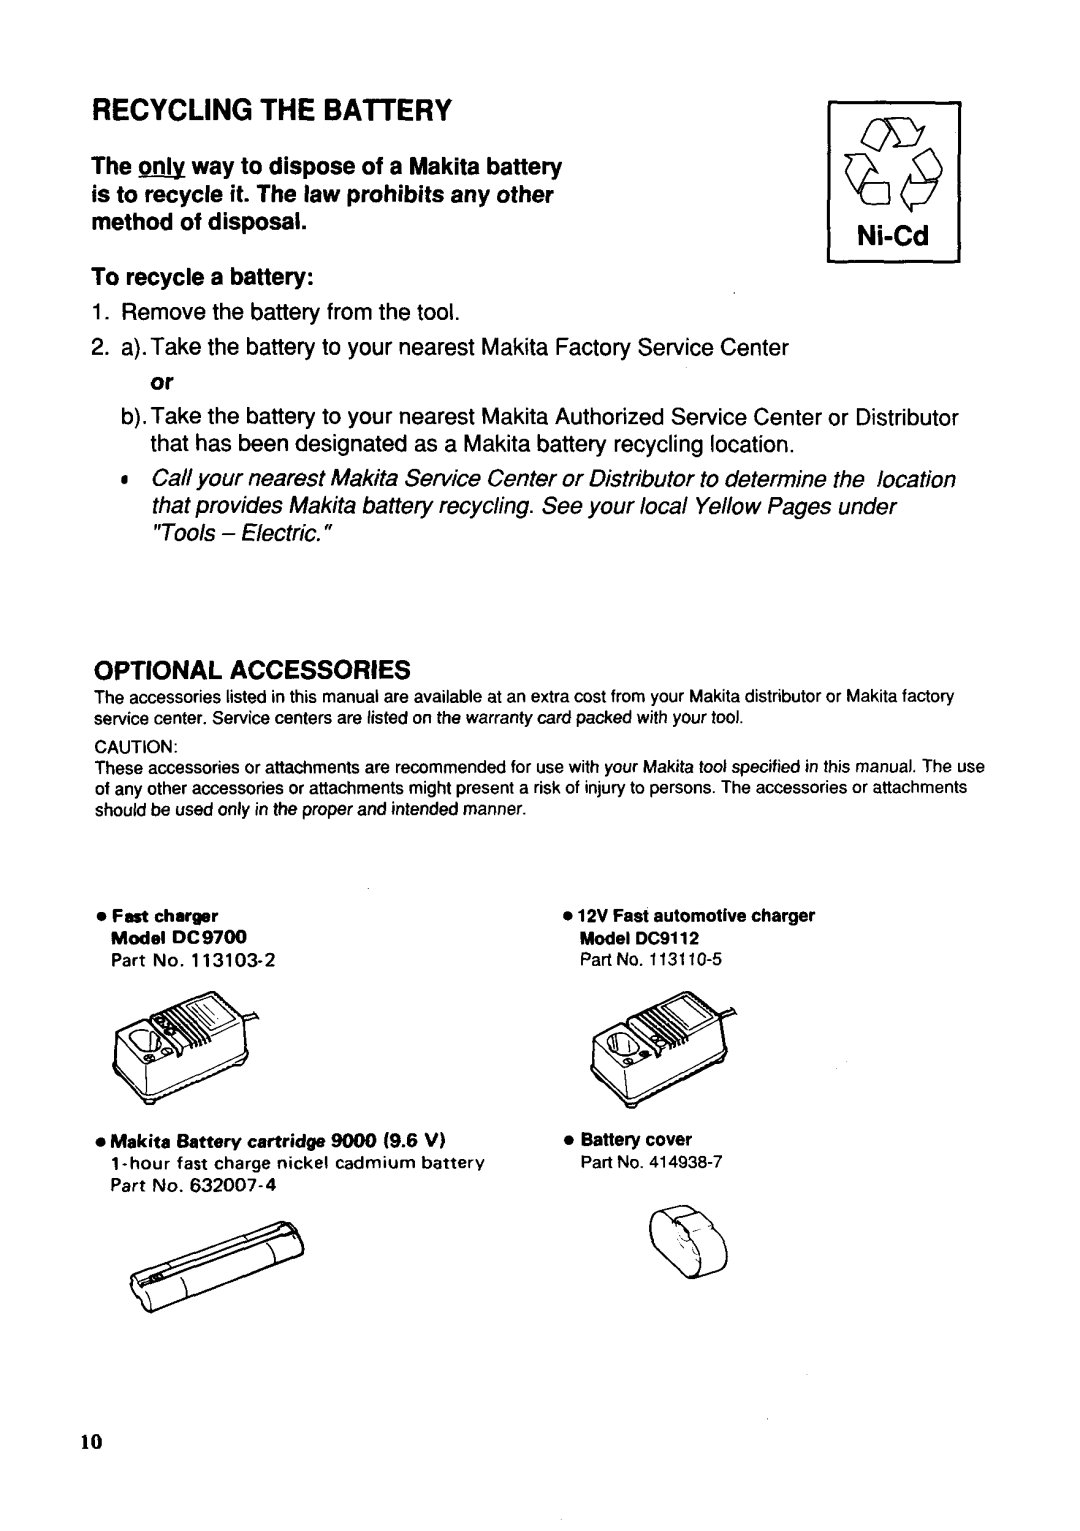 Makita 8402VDW Recyclingthe Battery, Ni-Cd, Optional Accessories, The way to dispose of a Makita battery, Fast charger 